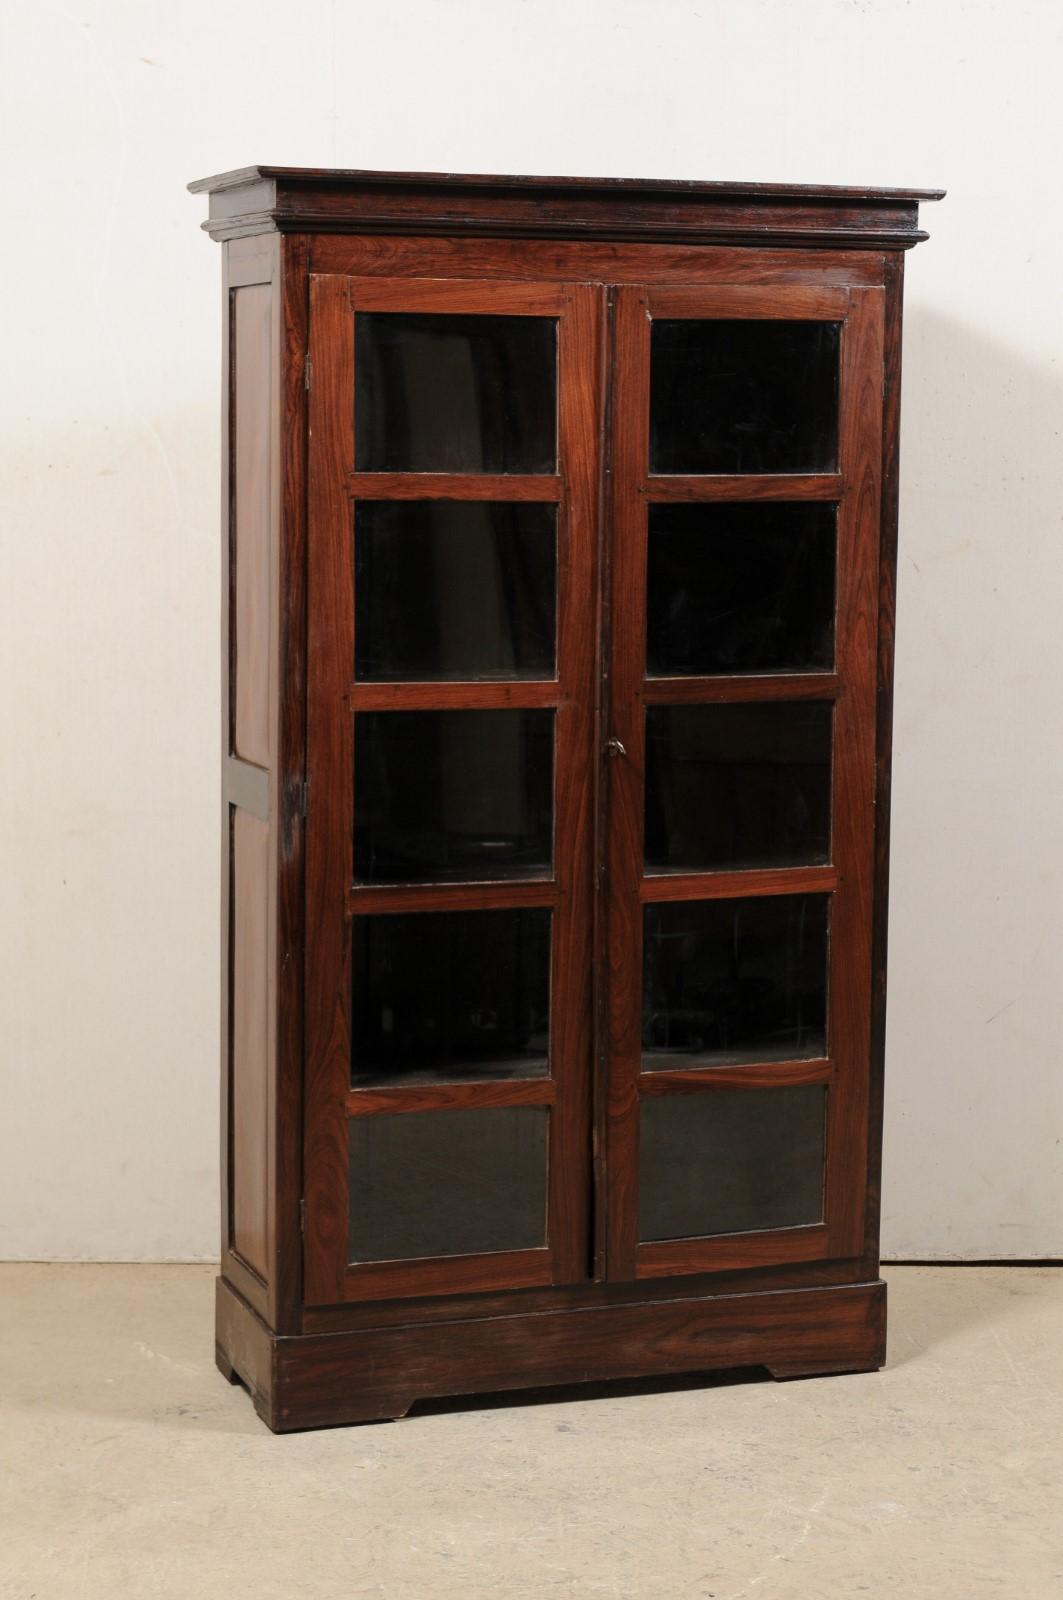 A tall British Colonial rosewood storage cabinet with glass doors from the early 20th century. This antique display cabinet features a molded cornice atop a tall case with pair of five-panel front doors, set with glass. The skirt and sides of the